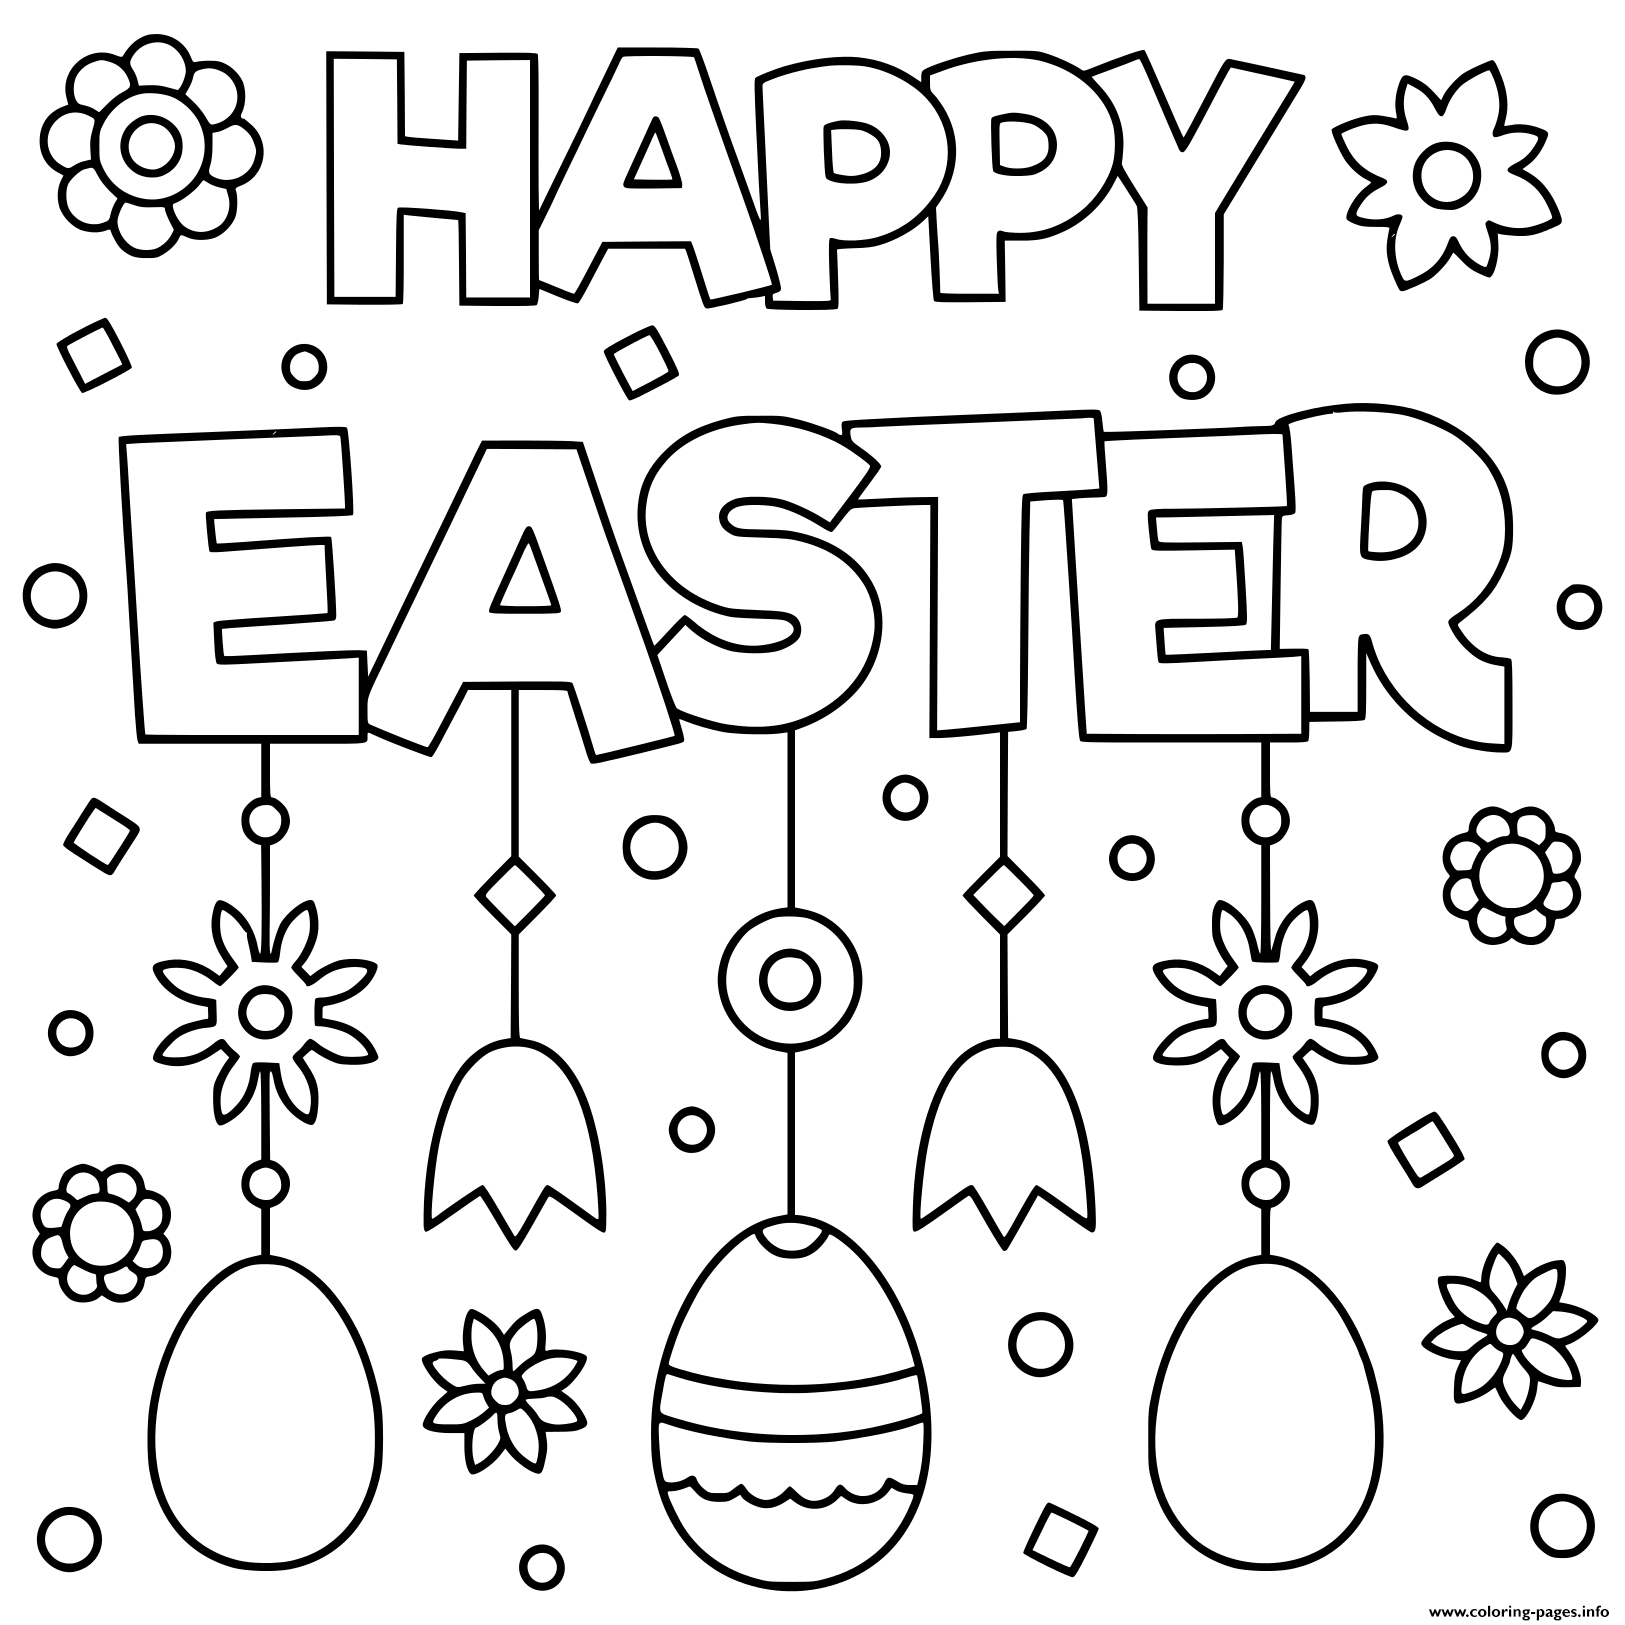 Happy Easter Egg Flowers 2019 coloring